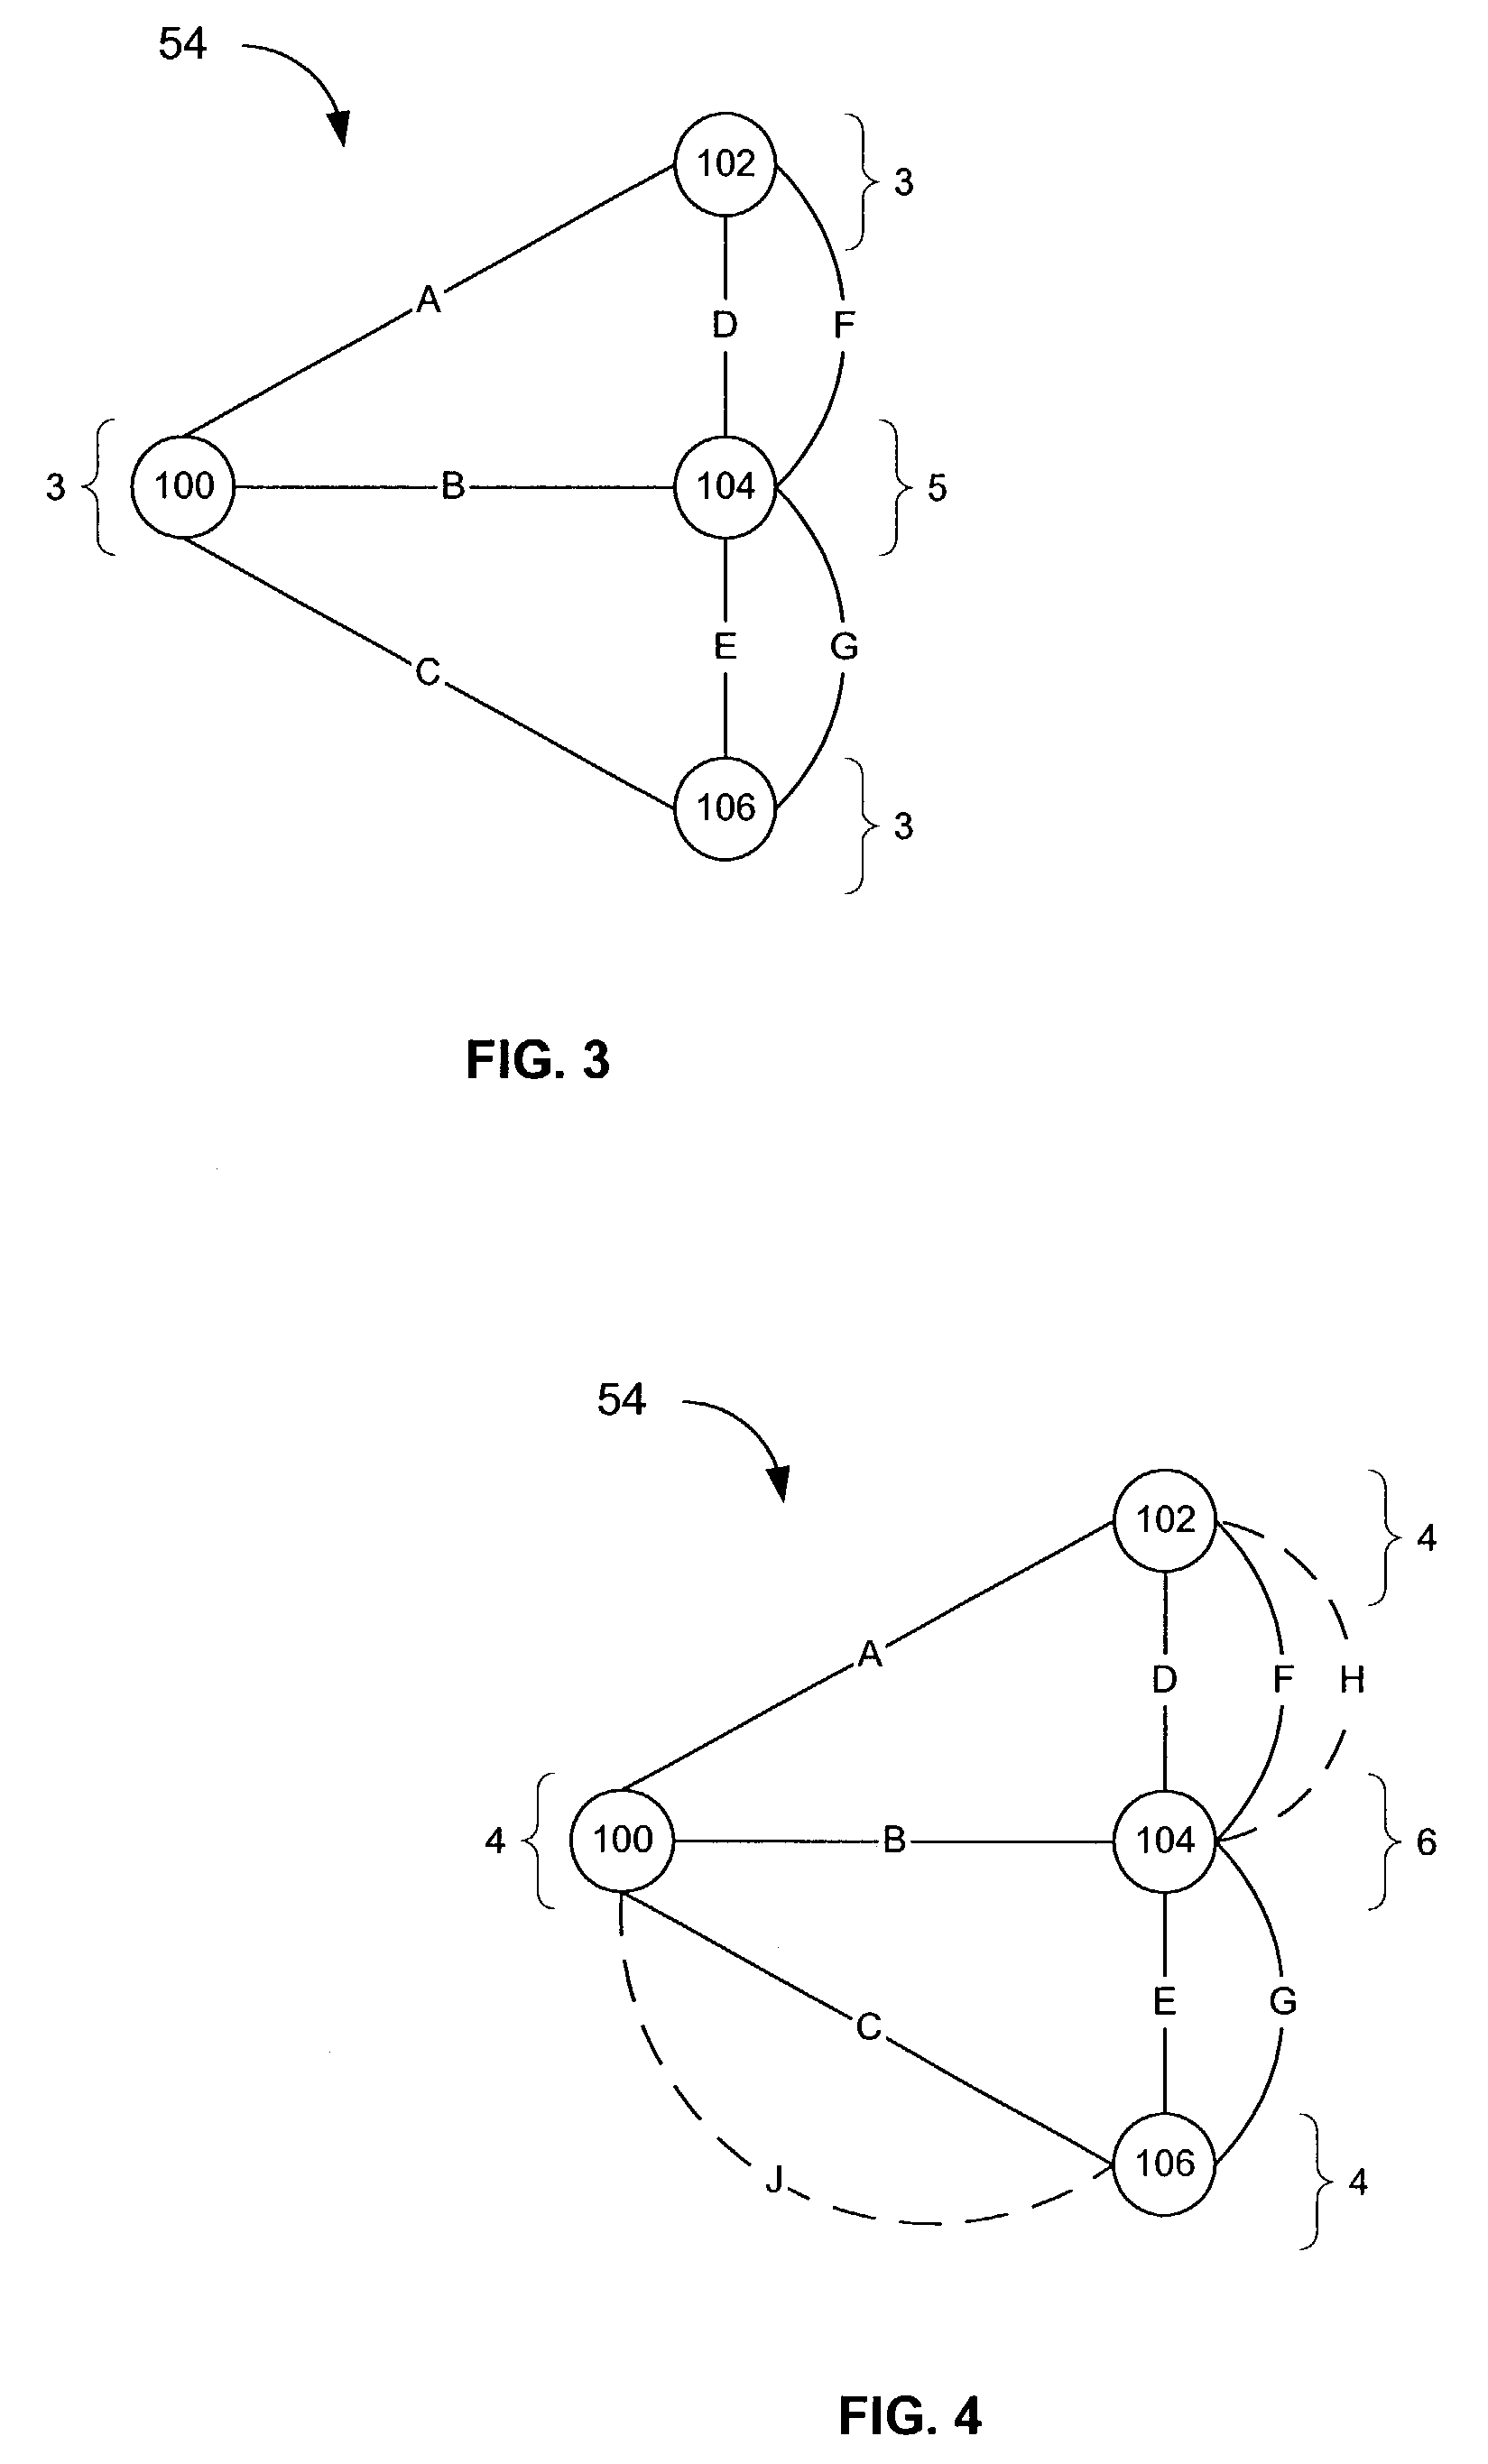 System and method for identifying nodes in a wireless mesh network